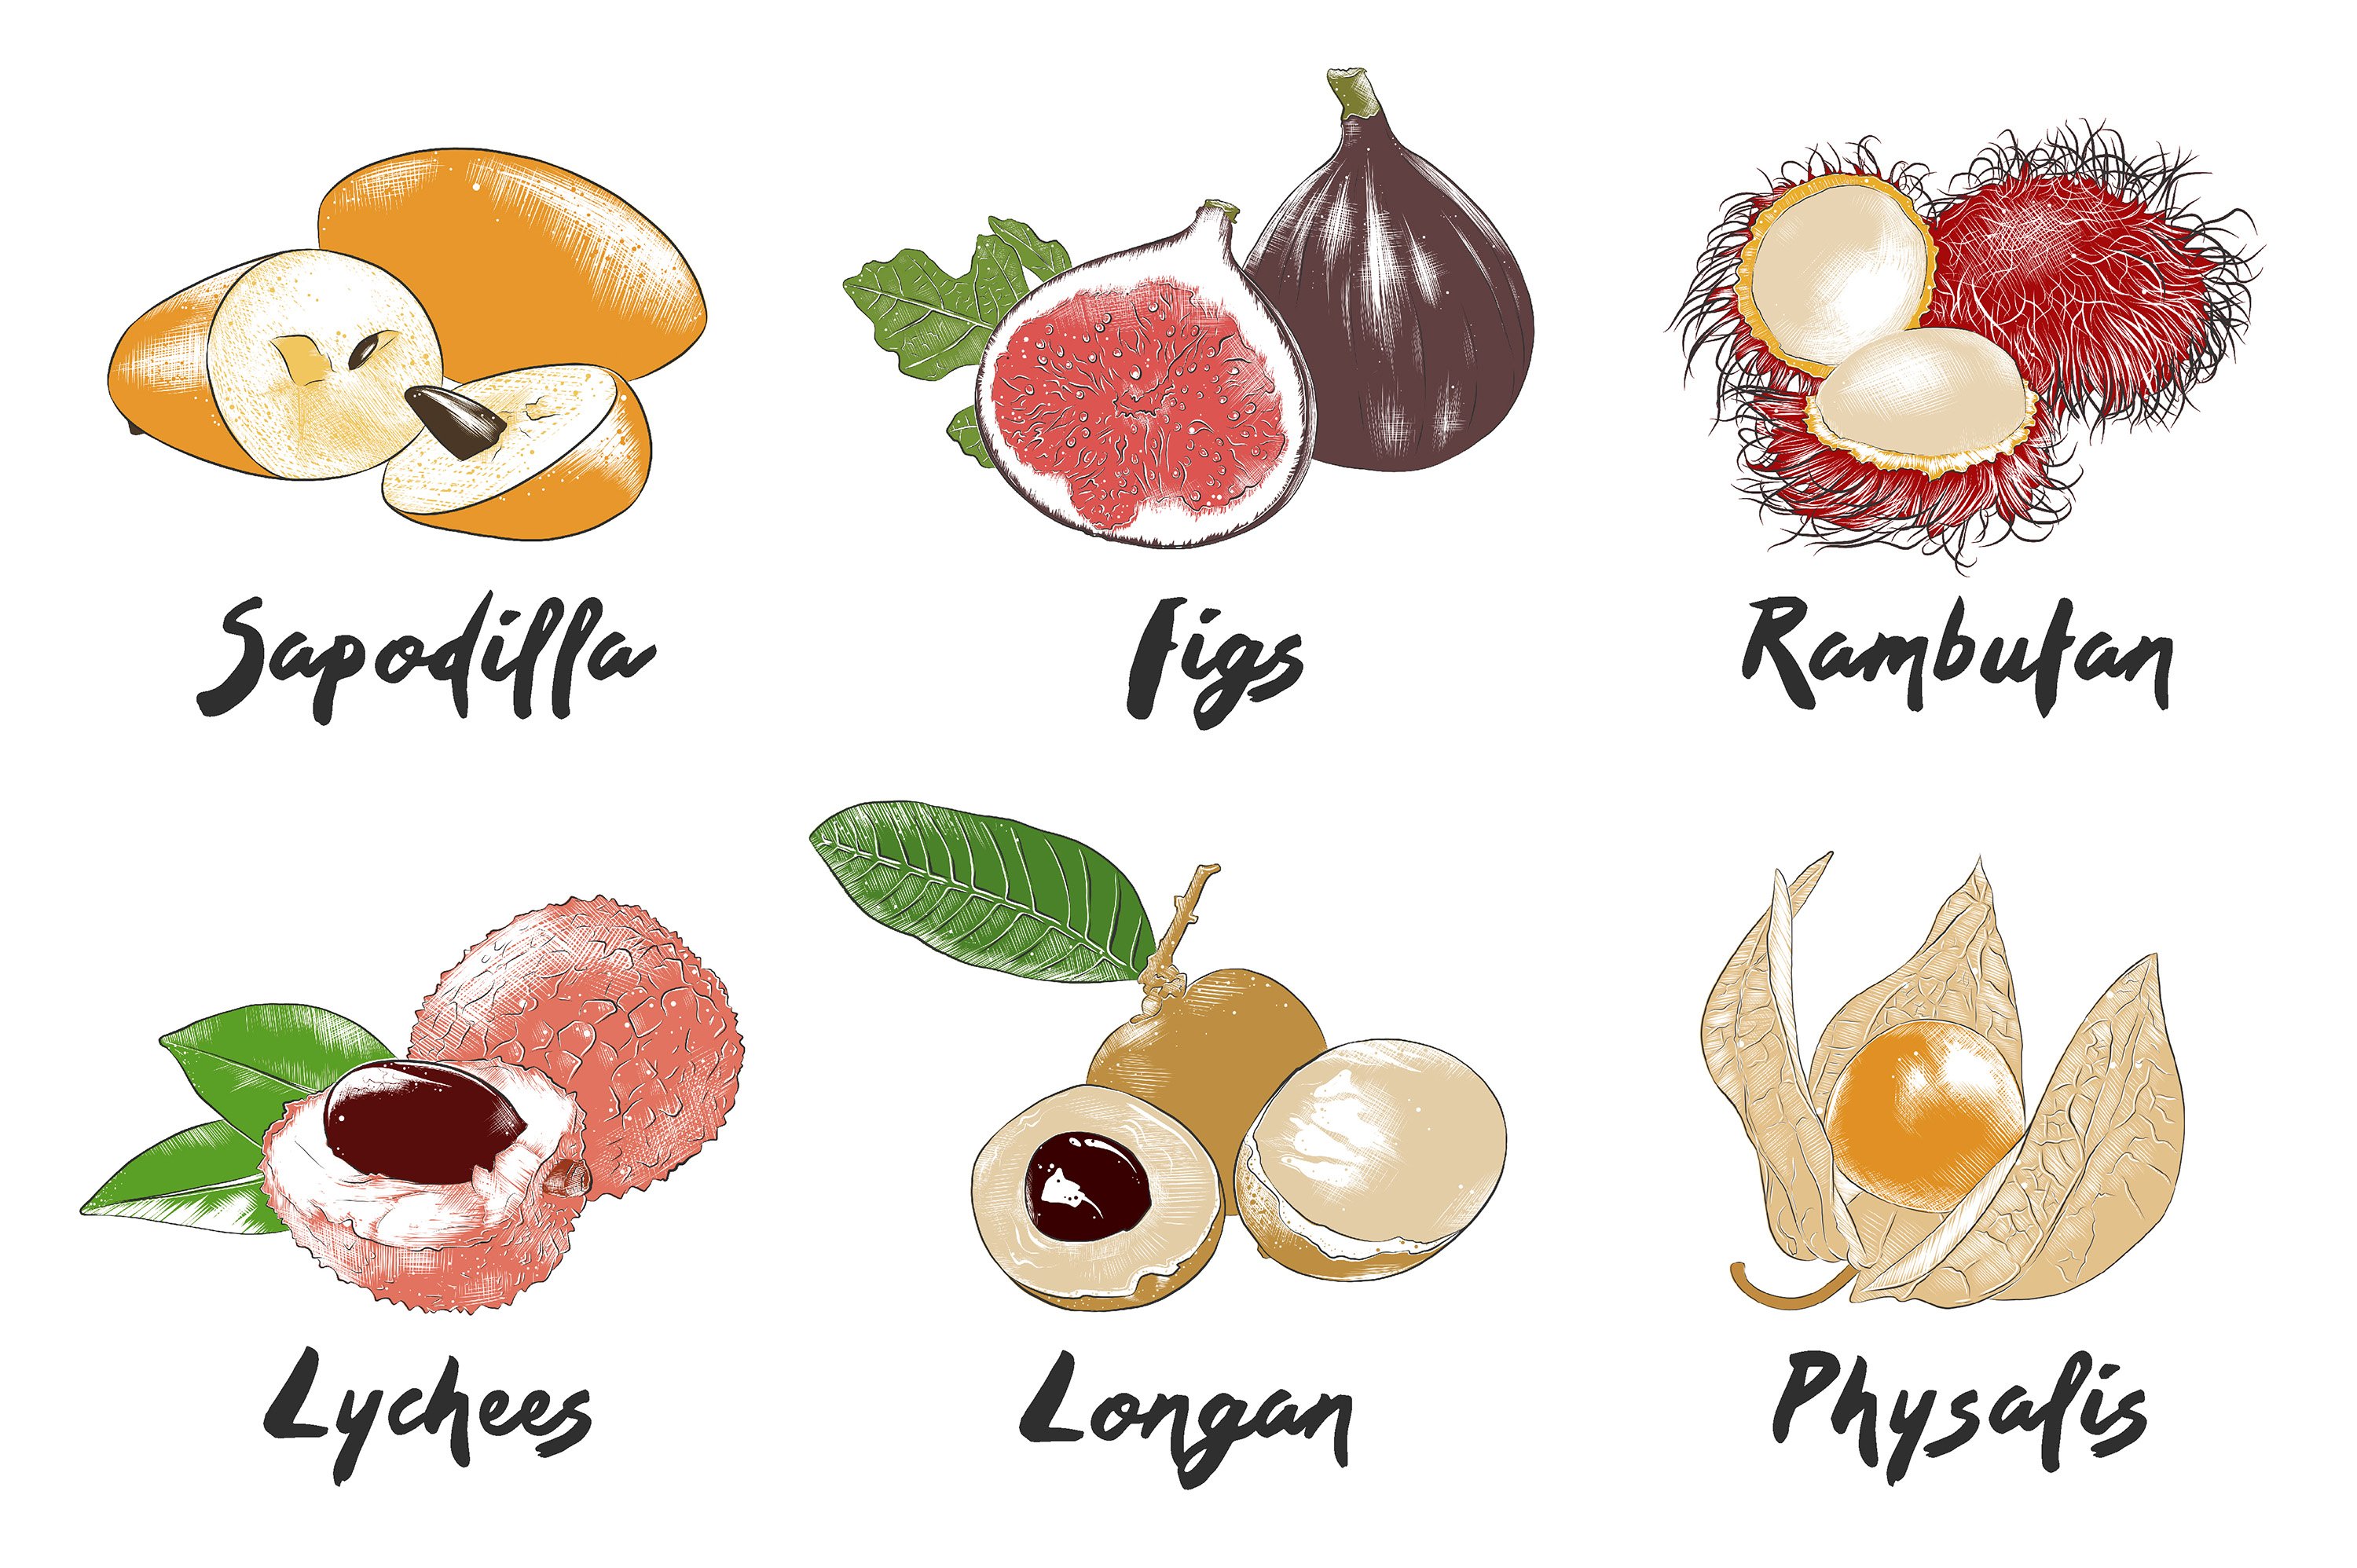 A bunch of different types of fruits on a white background.